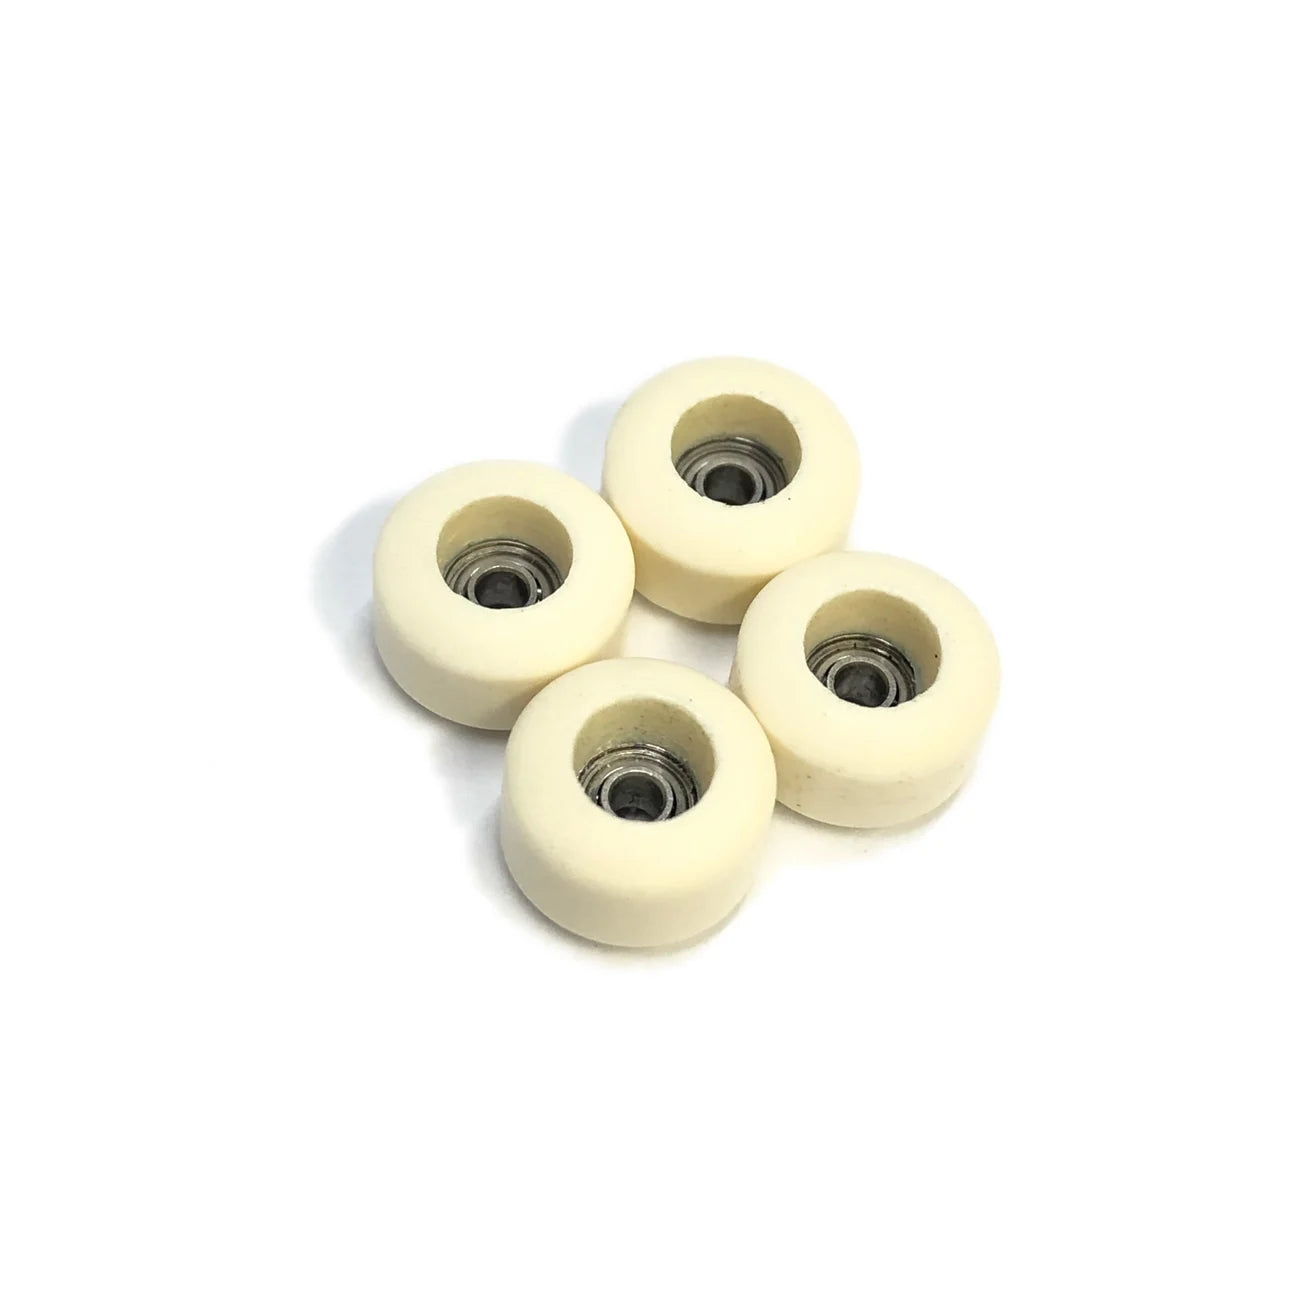 ILLPILLS Urethane Fingerboard Wheels; White colored street wheels for fingerboards;Made from high-quality urethane material for smooth and reliable performance; Enhances fingerboarding experience with improved grip and durability.